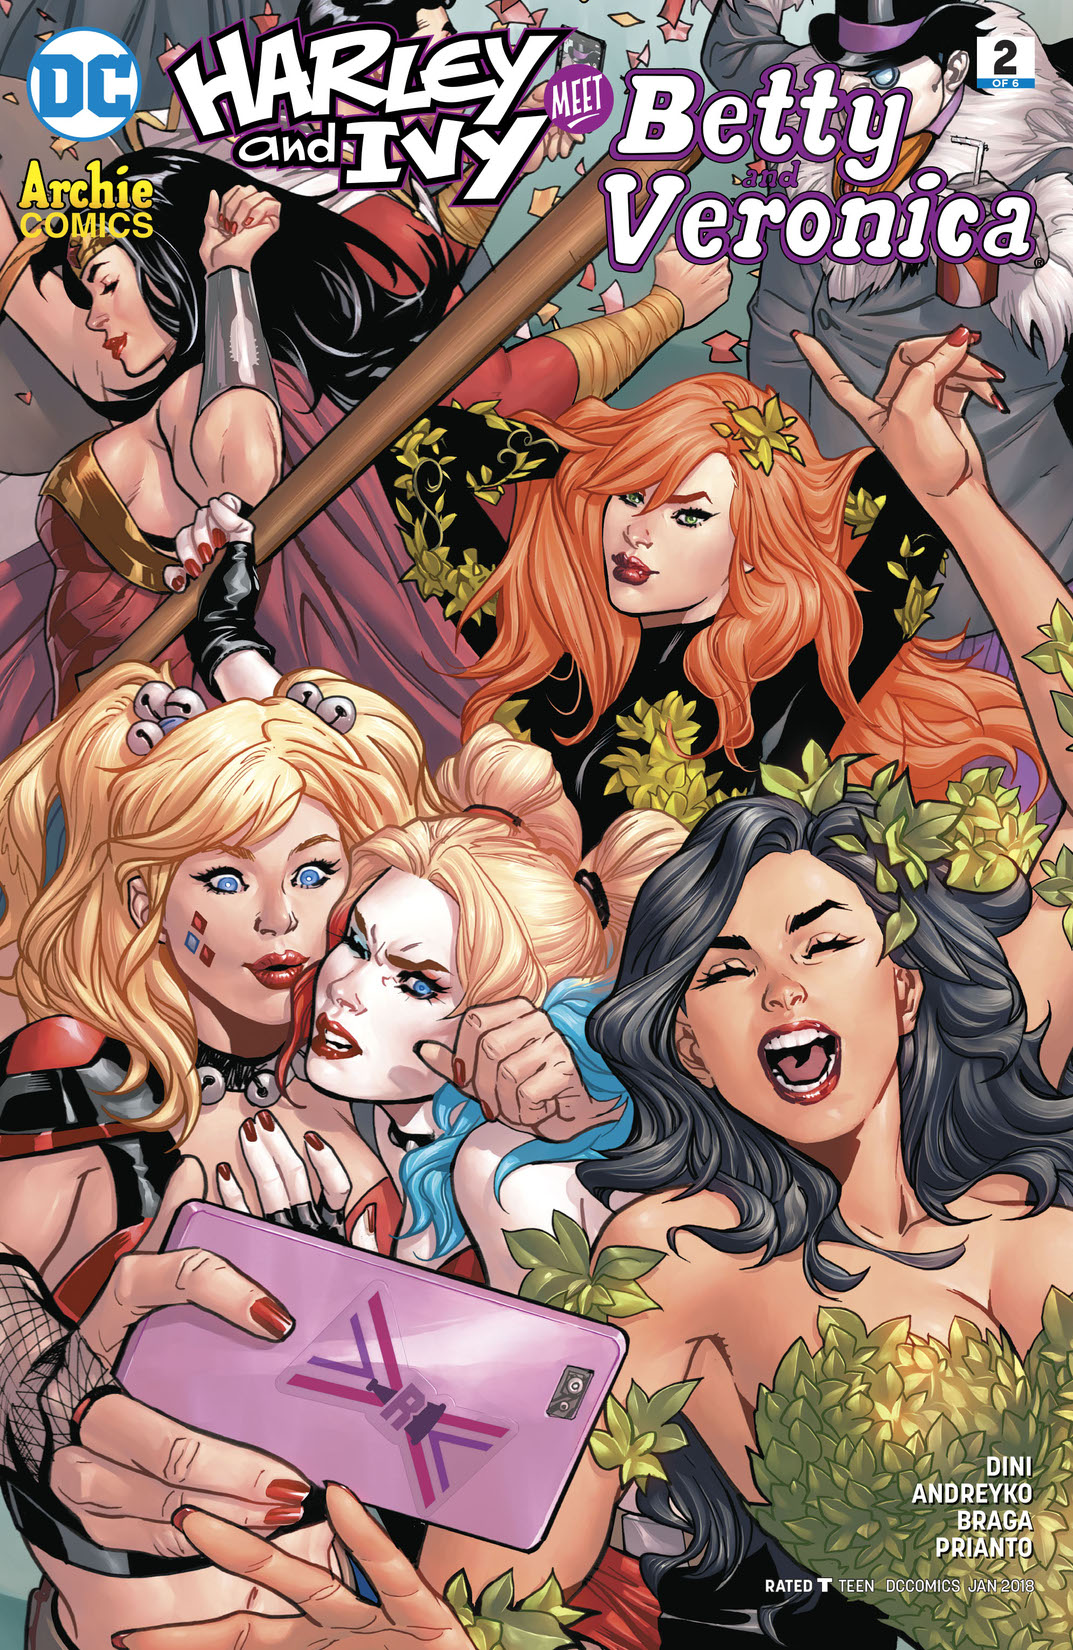 Harley & Ivy Meet Betty and Veronica #2 preview images